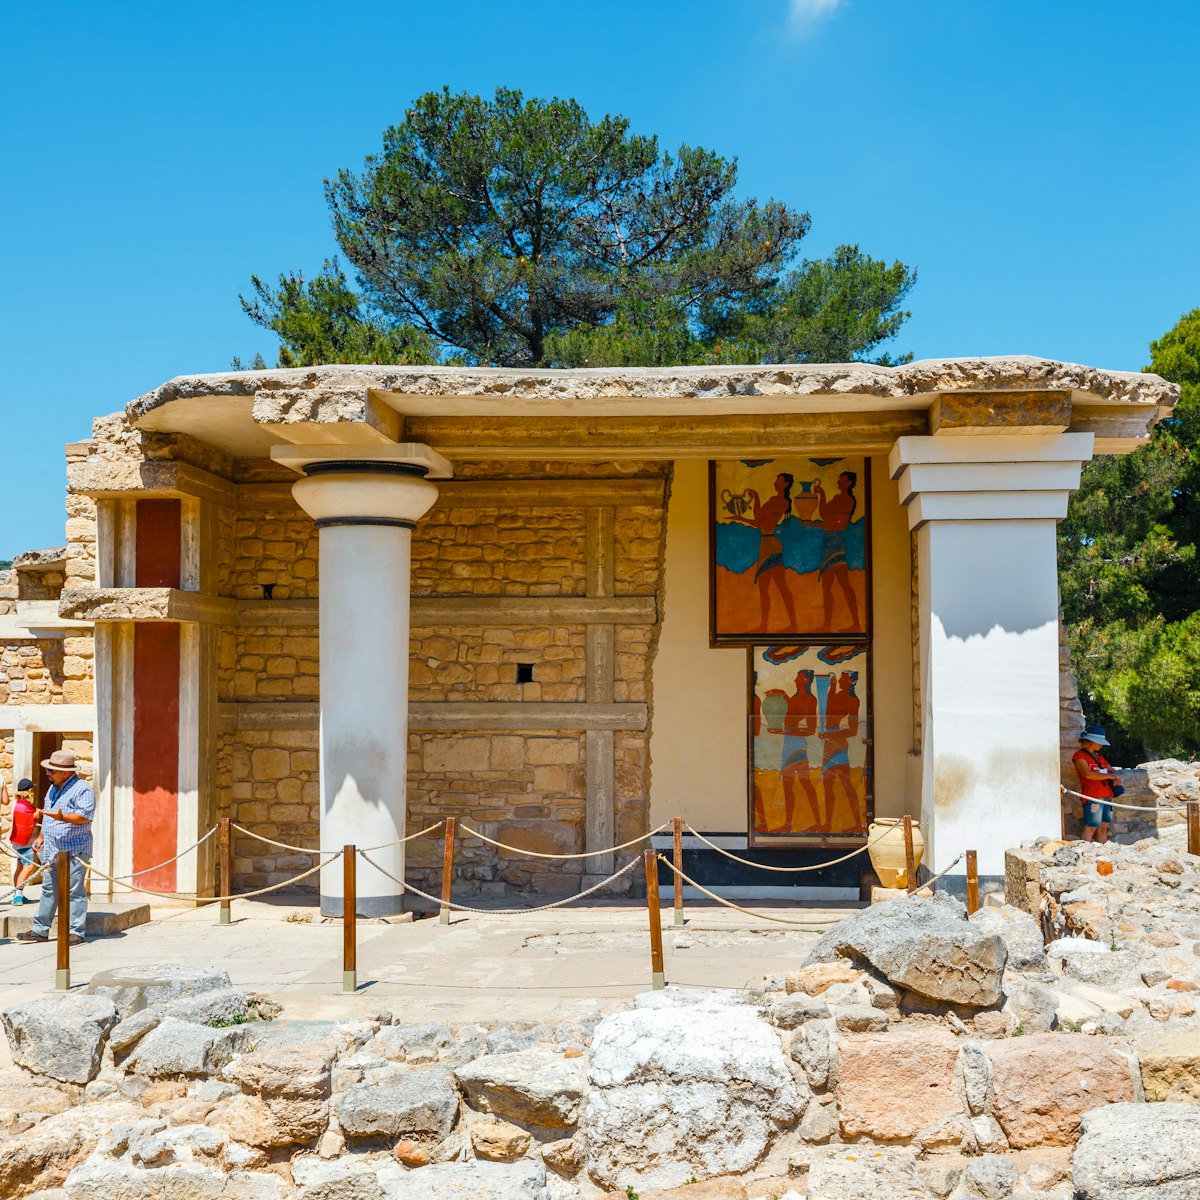 June 10, 2017: Visitors at the ancient ruins of the Minoan Palace of Knossos.
1033165021
ancient, antique, archaeological, archeology, architecture, art, building, civilization, columns, crete, culture, destination, europe, famous, fresco, greece, greek, heraklion, historic, historical, knossos, labyrinth, landmark, mediterranean, minoan, minos, minotaur, monument, mythology, old, painting, palace, people, pillars, place, reconstruction, relief, ruins, sightseeign, site, sky, stone, structure, summer, tourism, travel, visit, wall